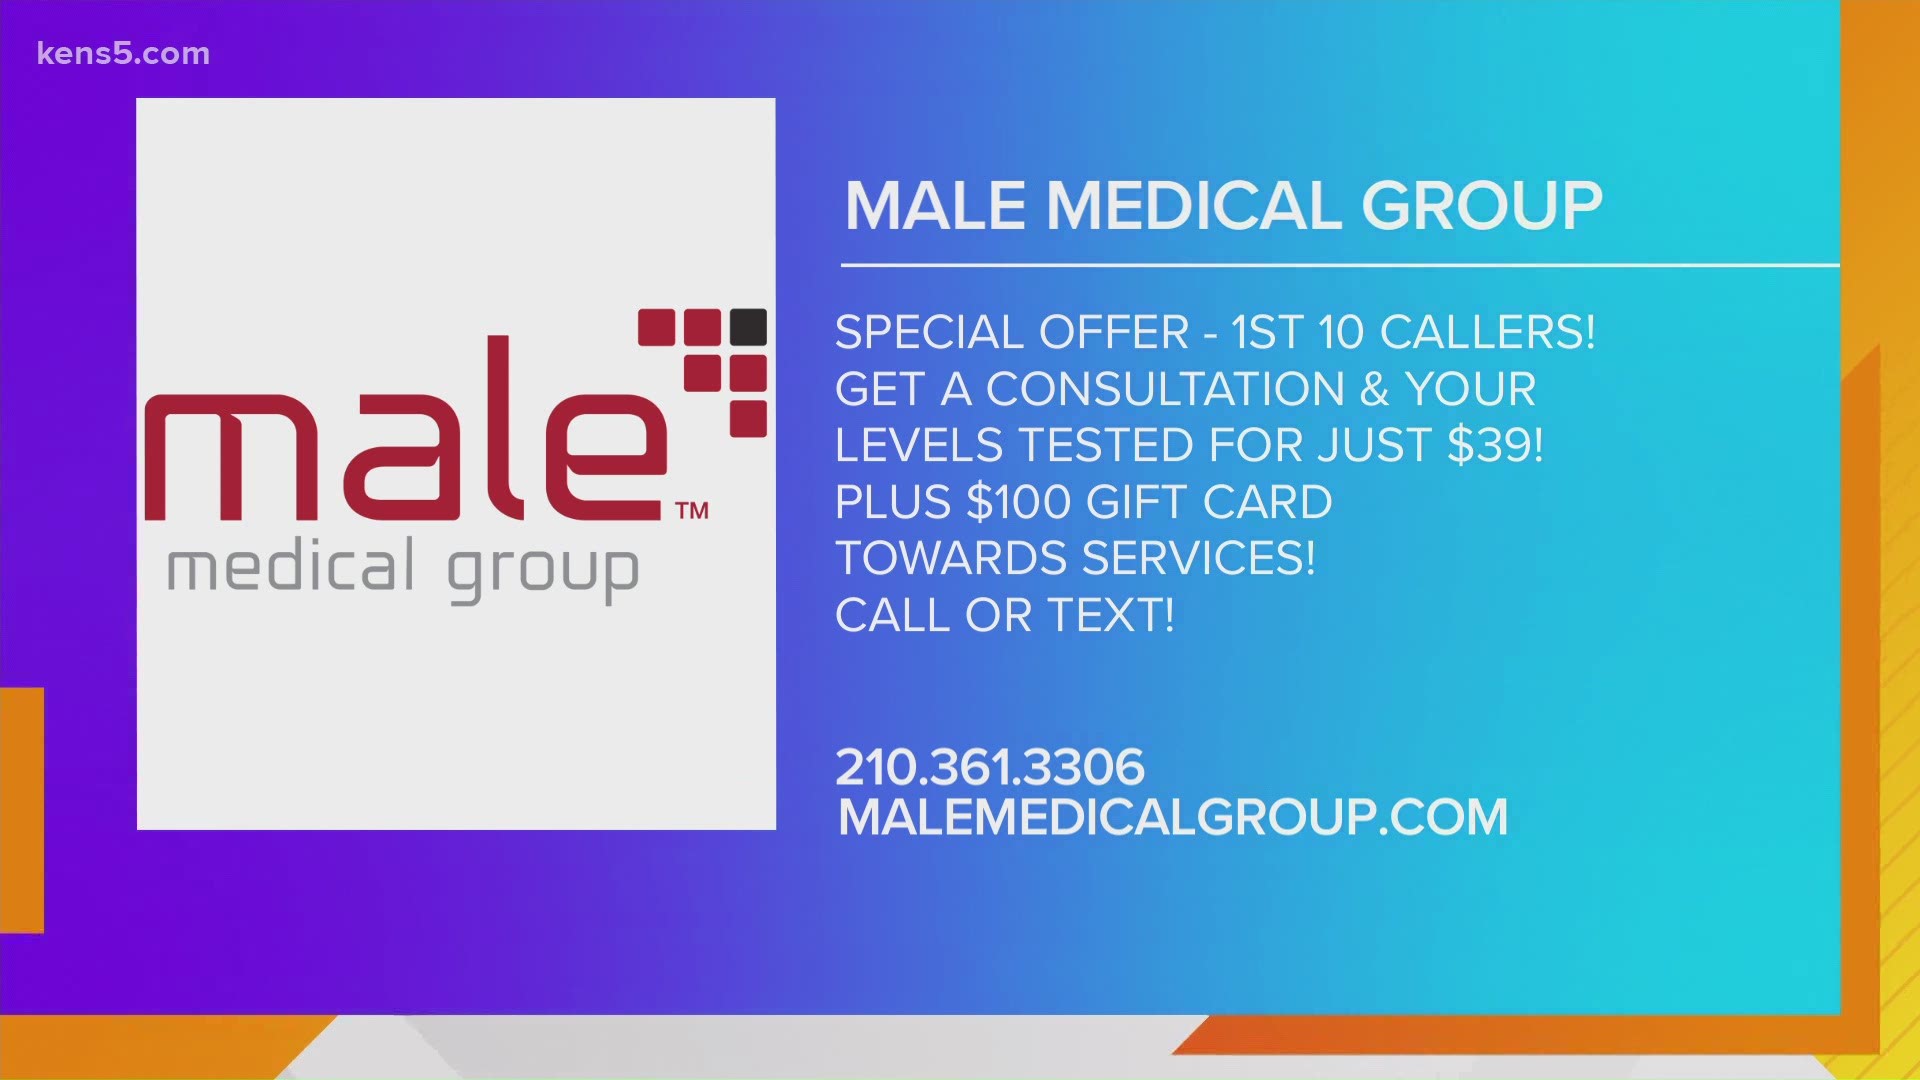 When we age we experience more than outward physical changes.  Male Medical Group explains how they're helping men feel their best through testosterone therapy.